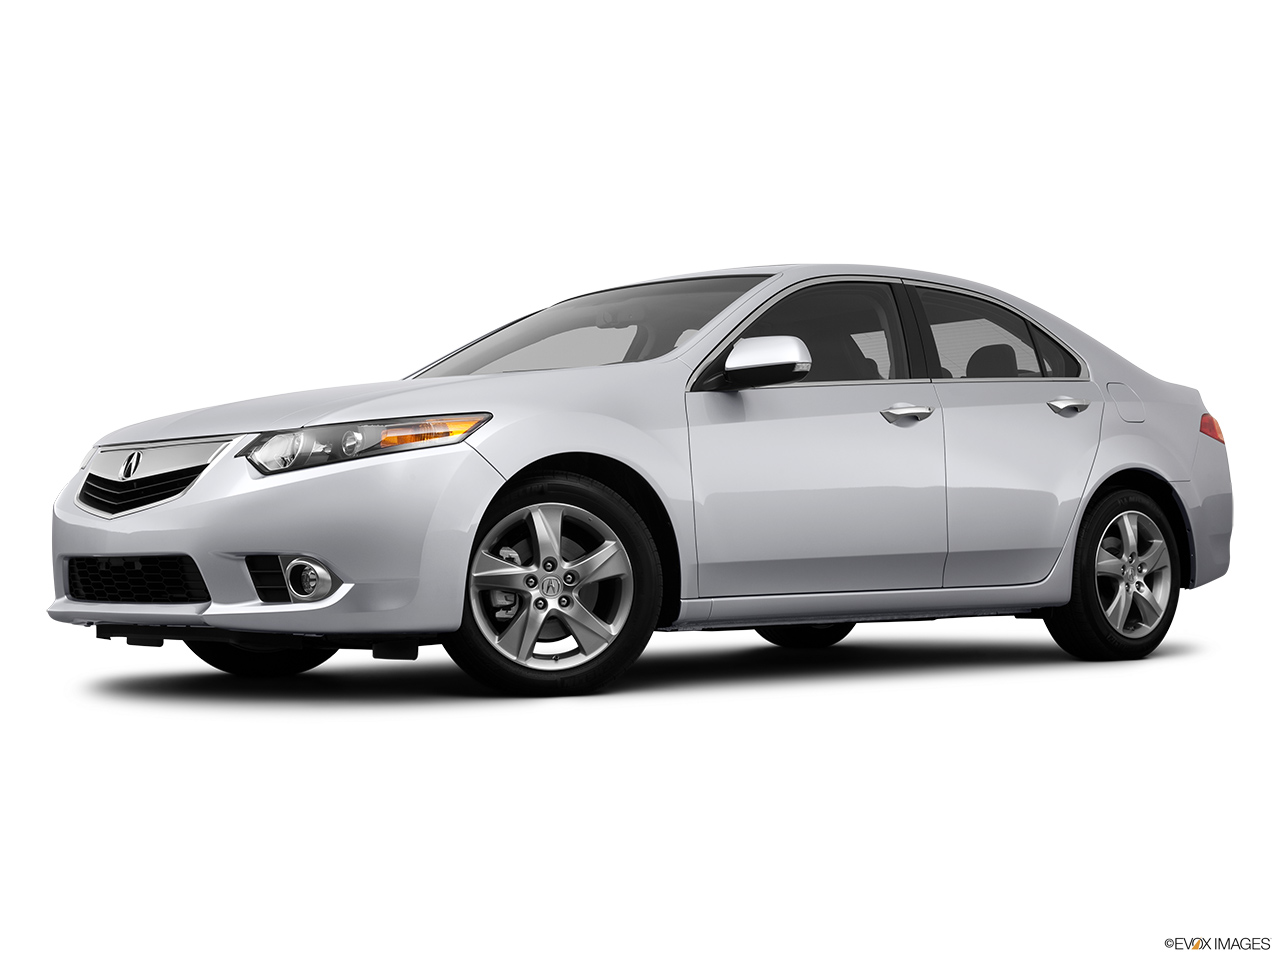 2013 Acura TSX 5-speed Automatic Low/wide front 5/8. 